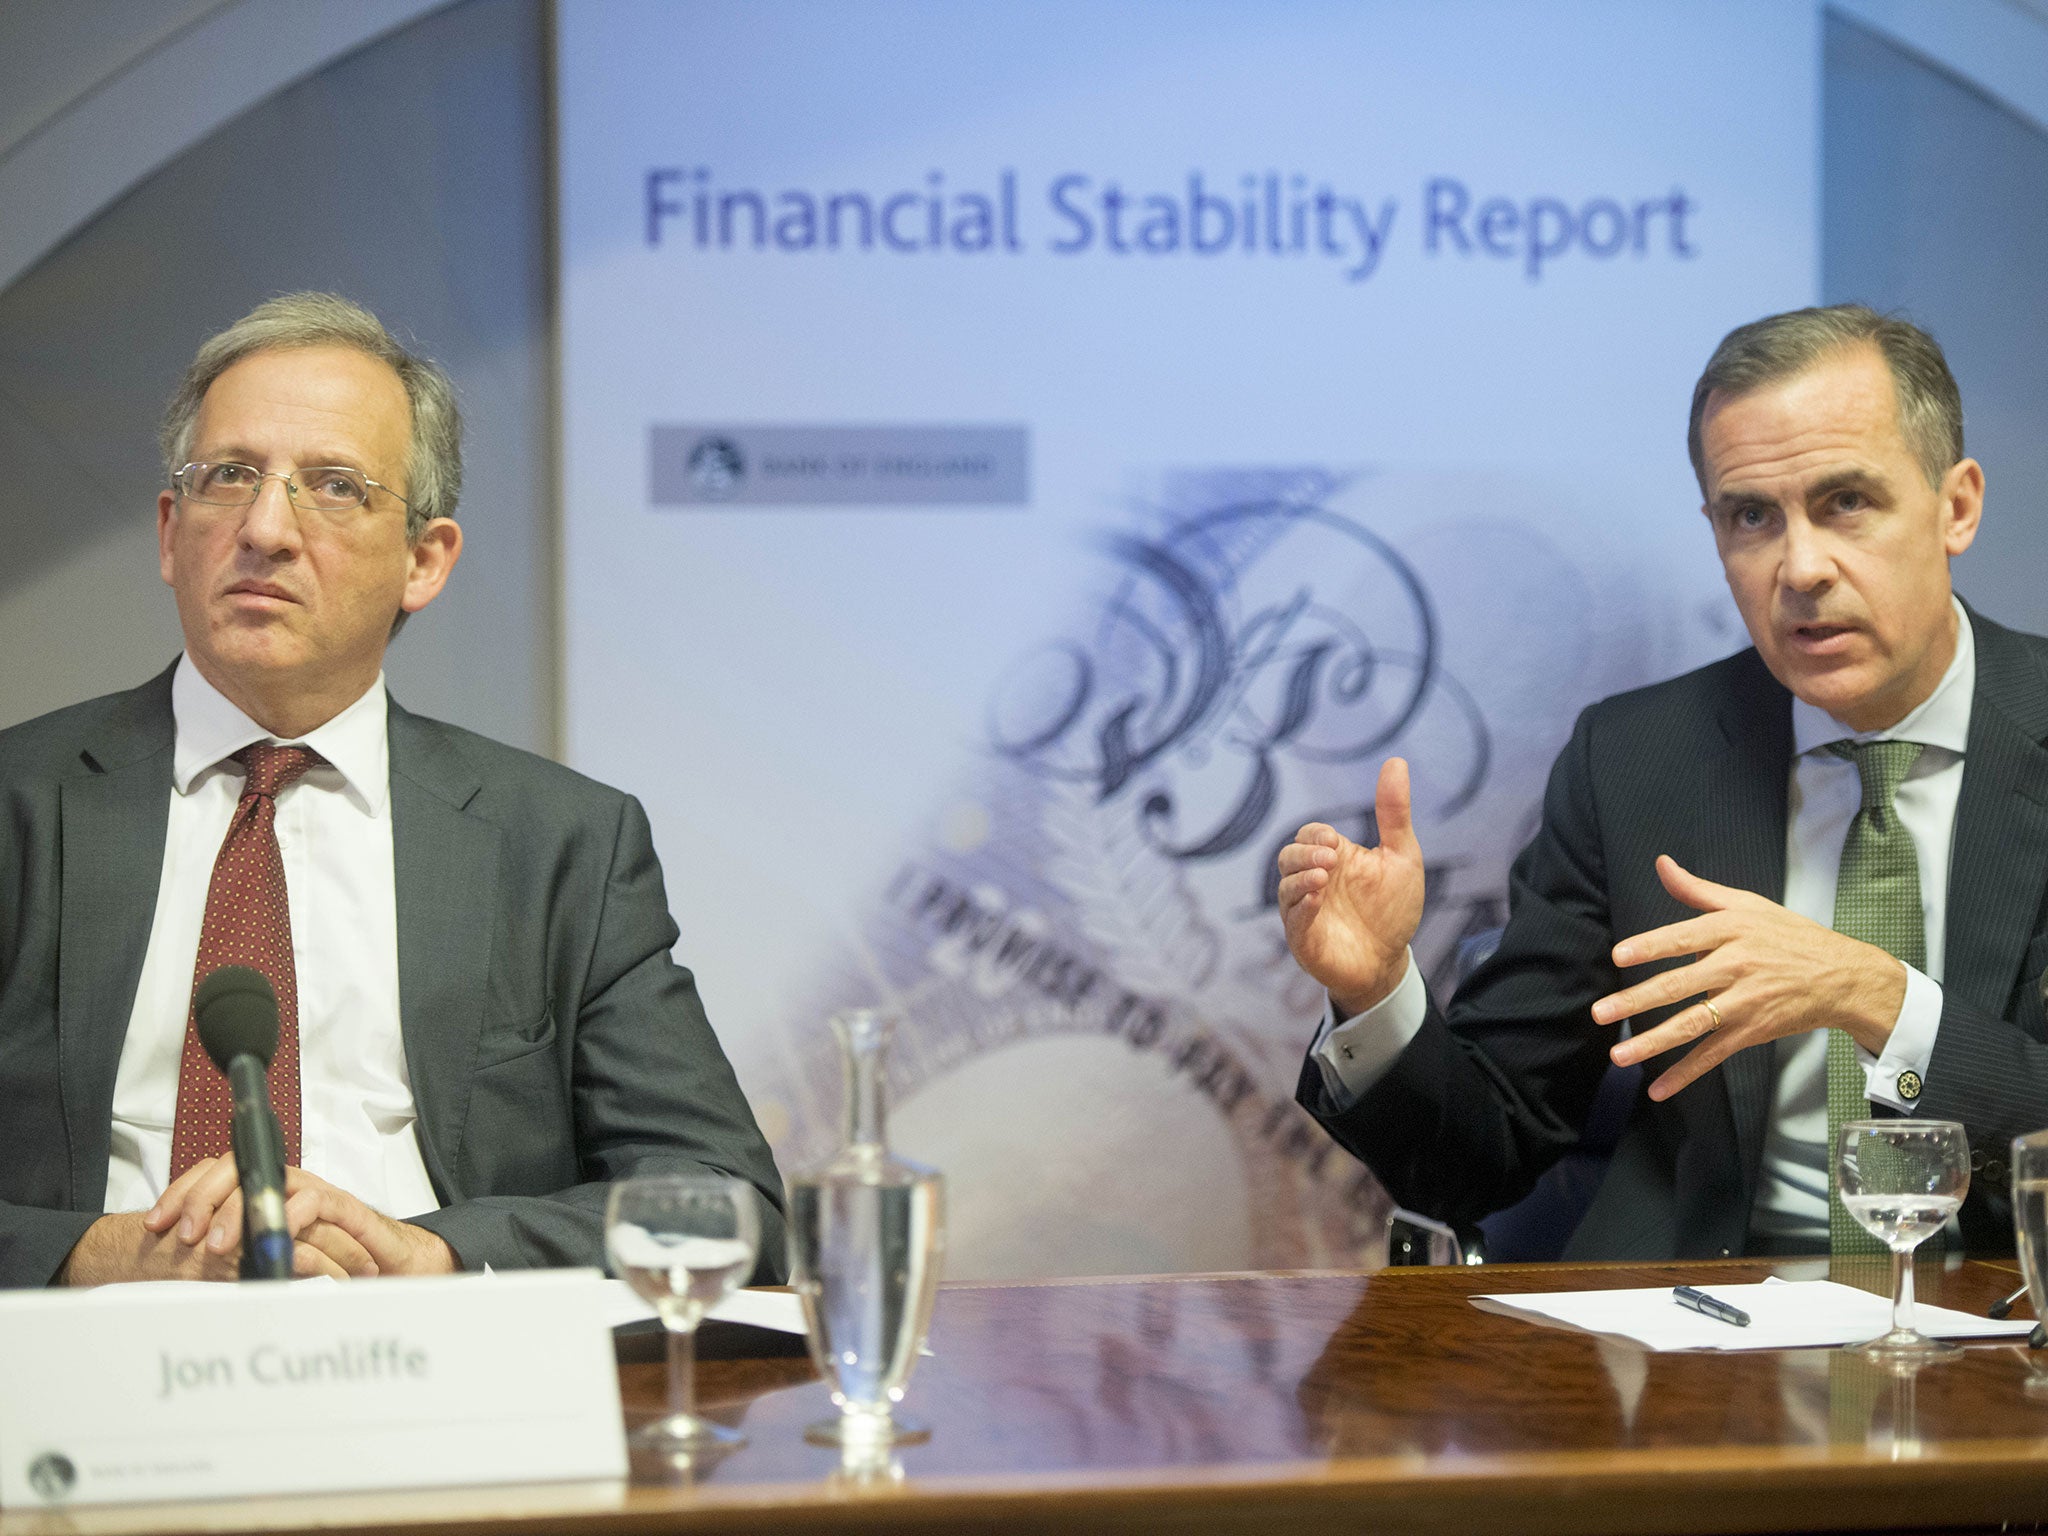 Sir Jon Cunliffe, left, pictured with Mark Carney, the current governor of the Bank of England